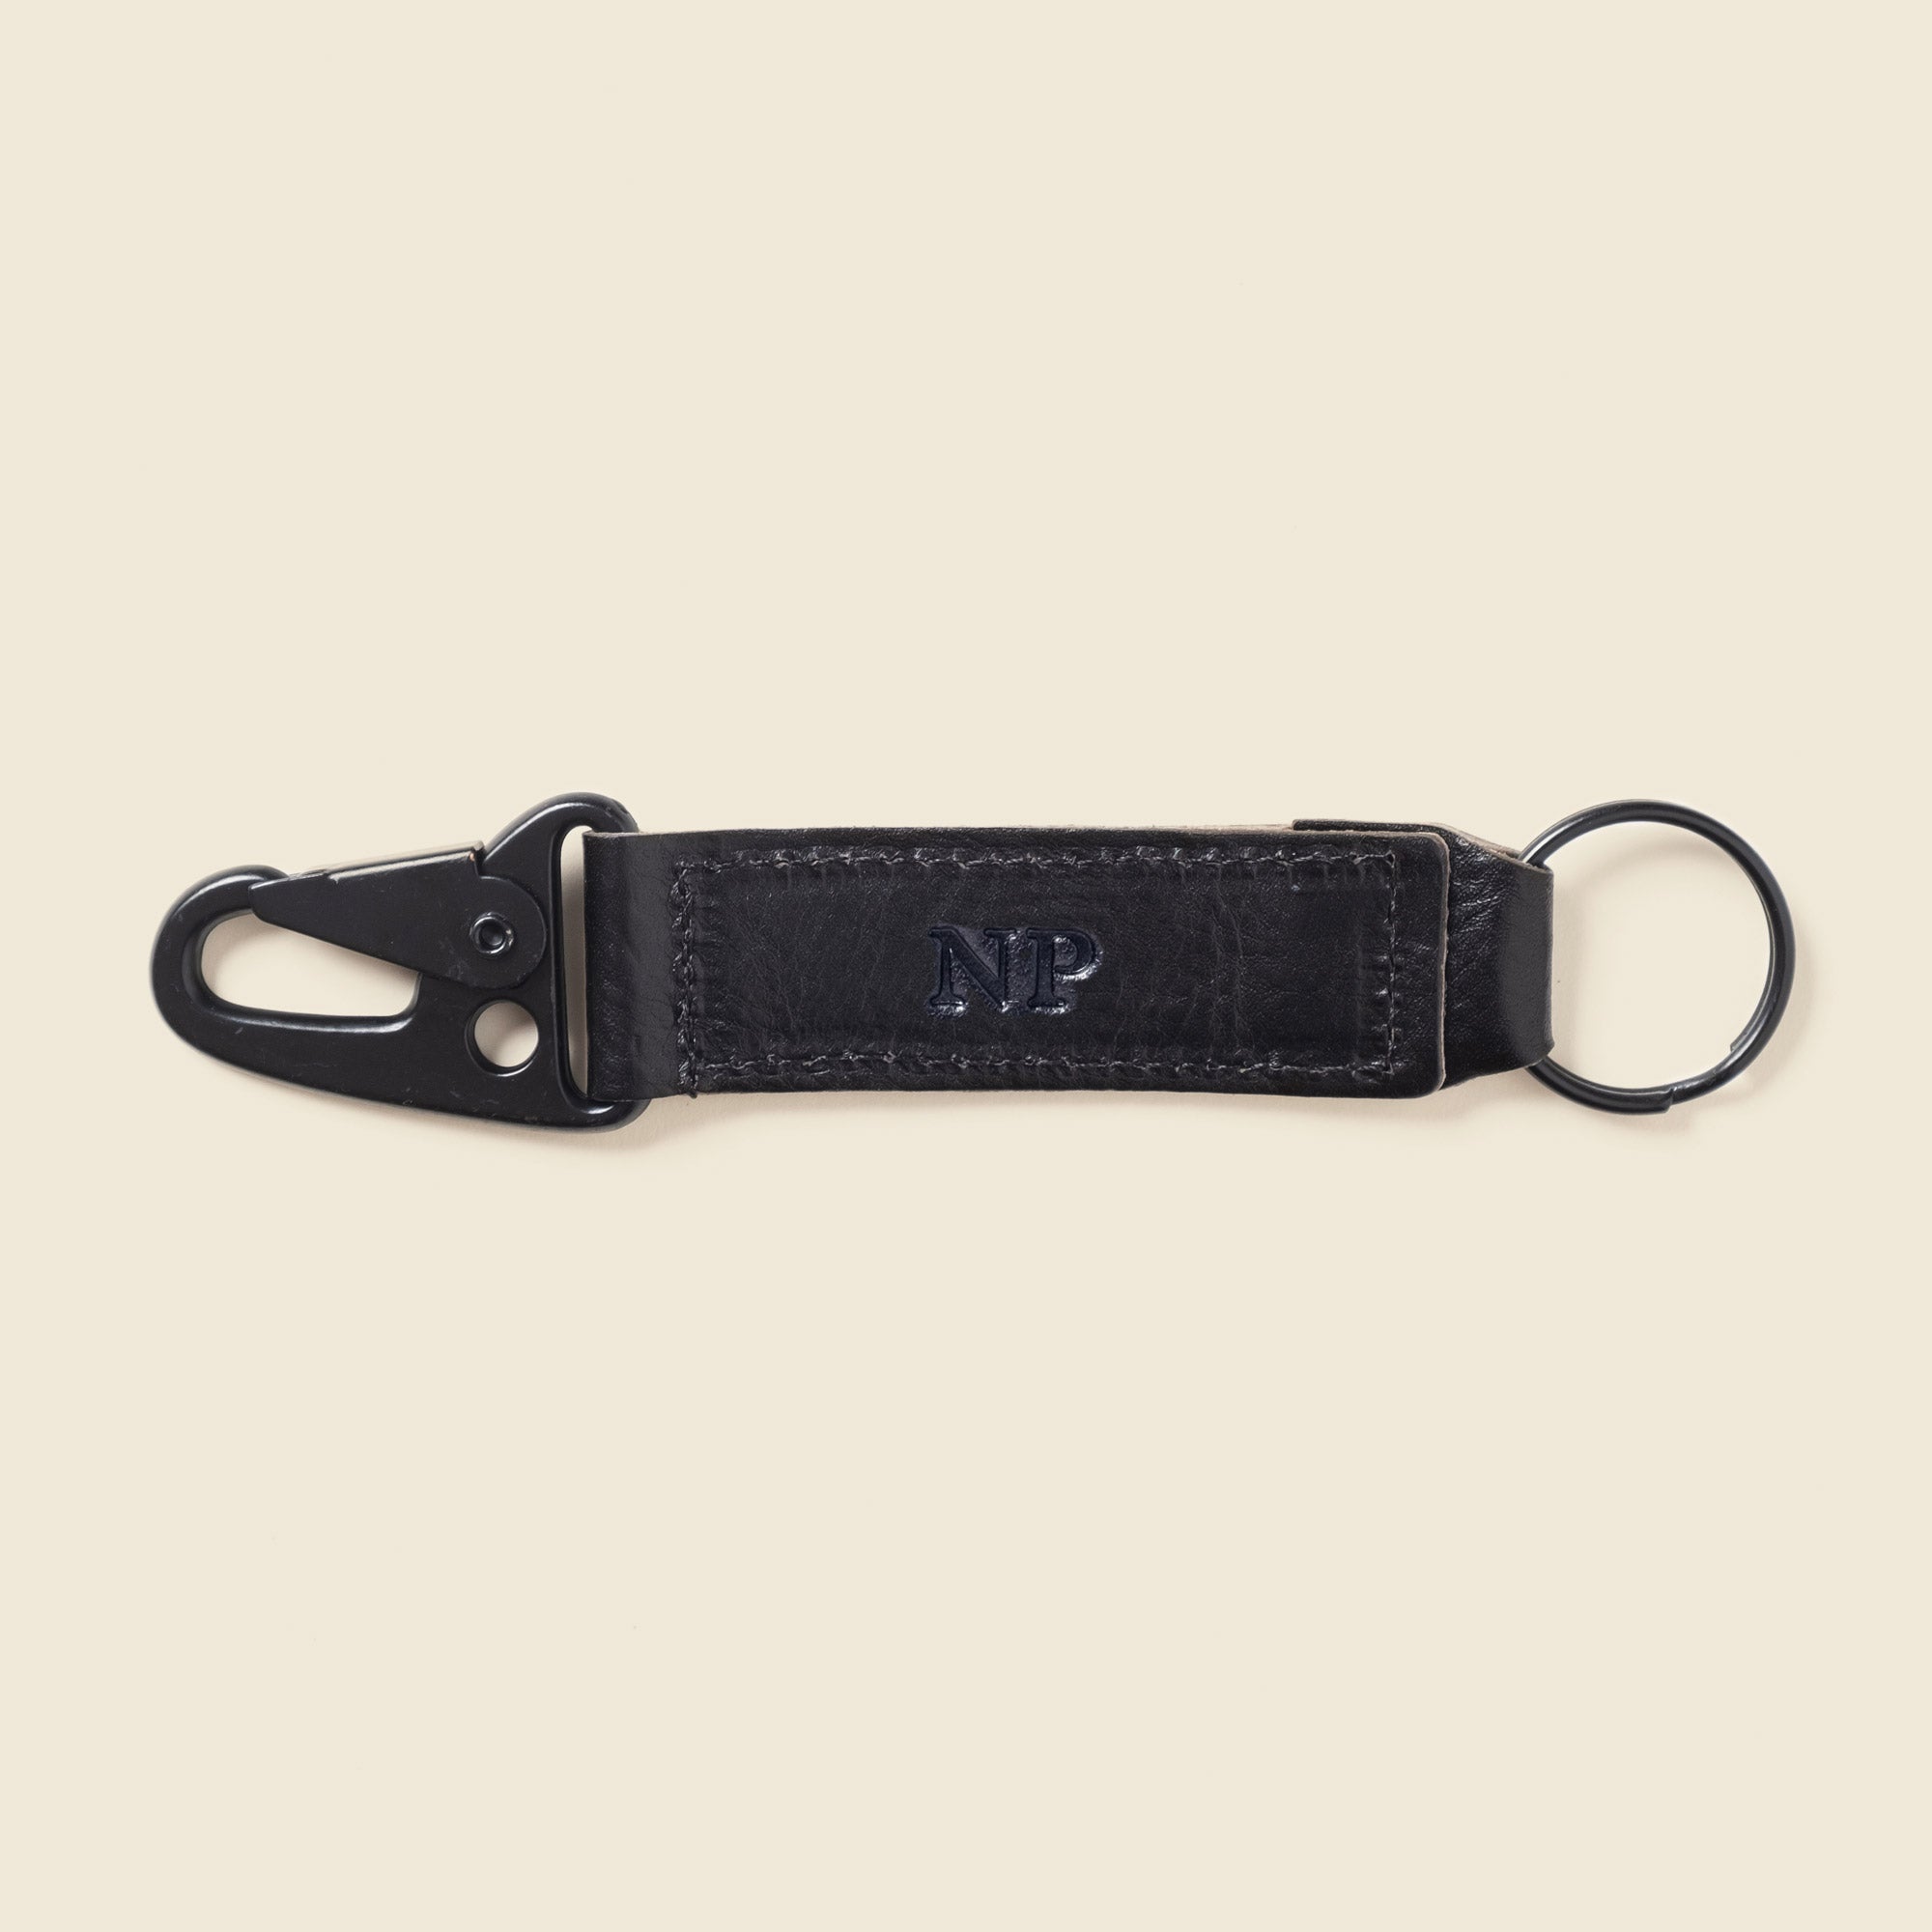 Hipster keychain with monogrammed initials